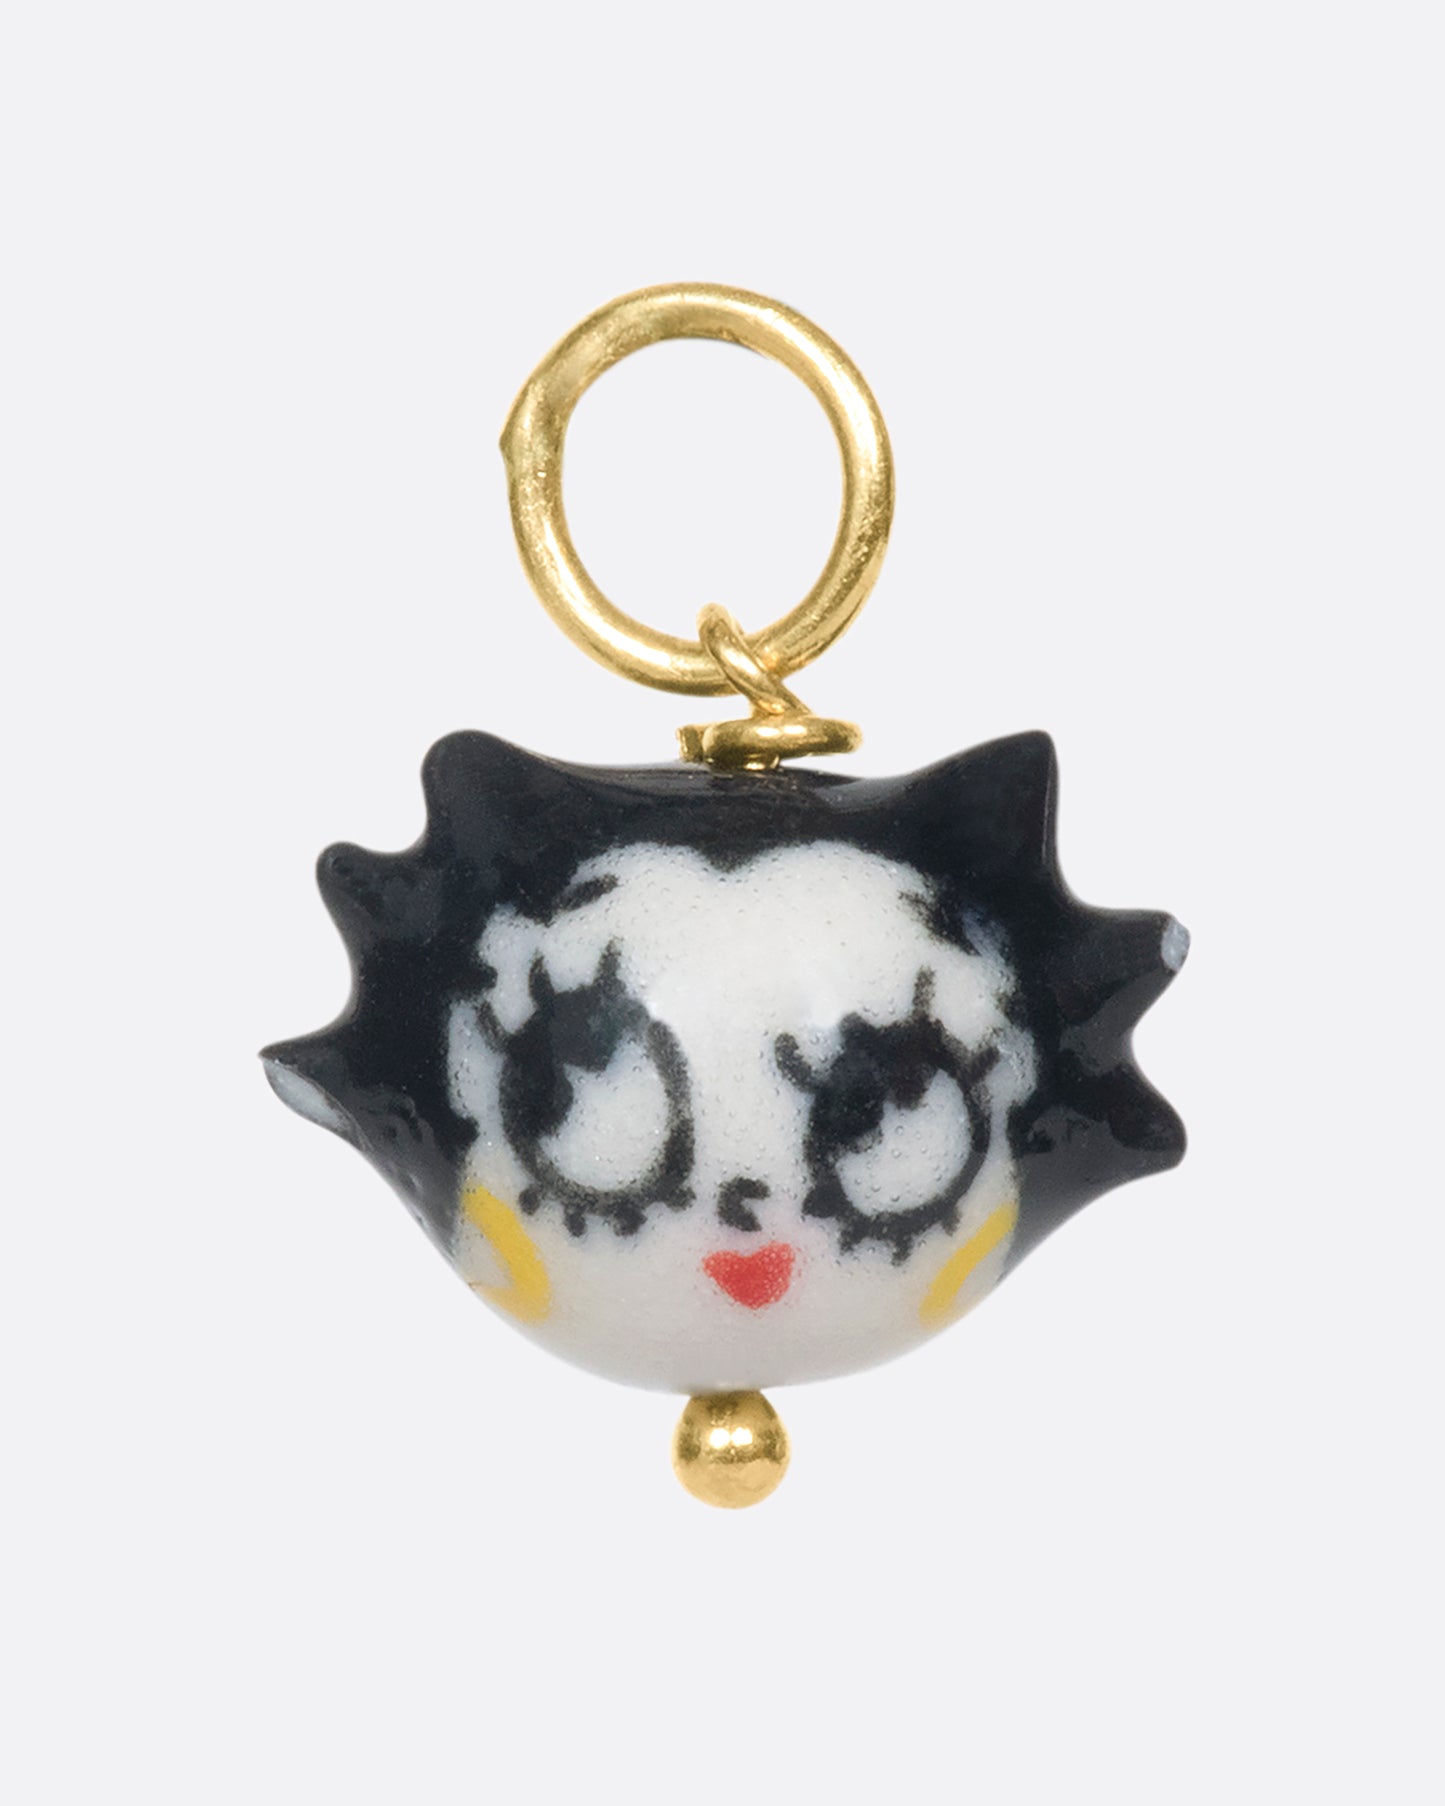 HAND PAINTED GLAZED PORCELAIN BETTY BOOP CHARM